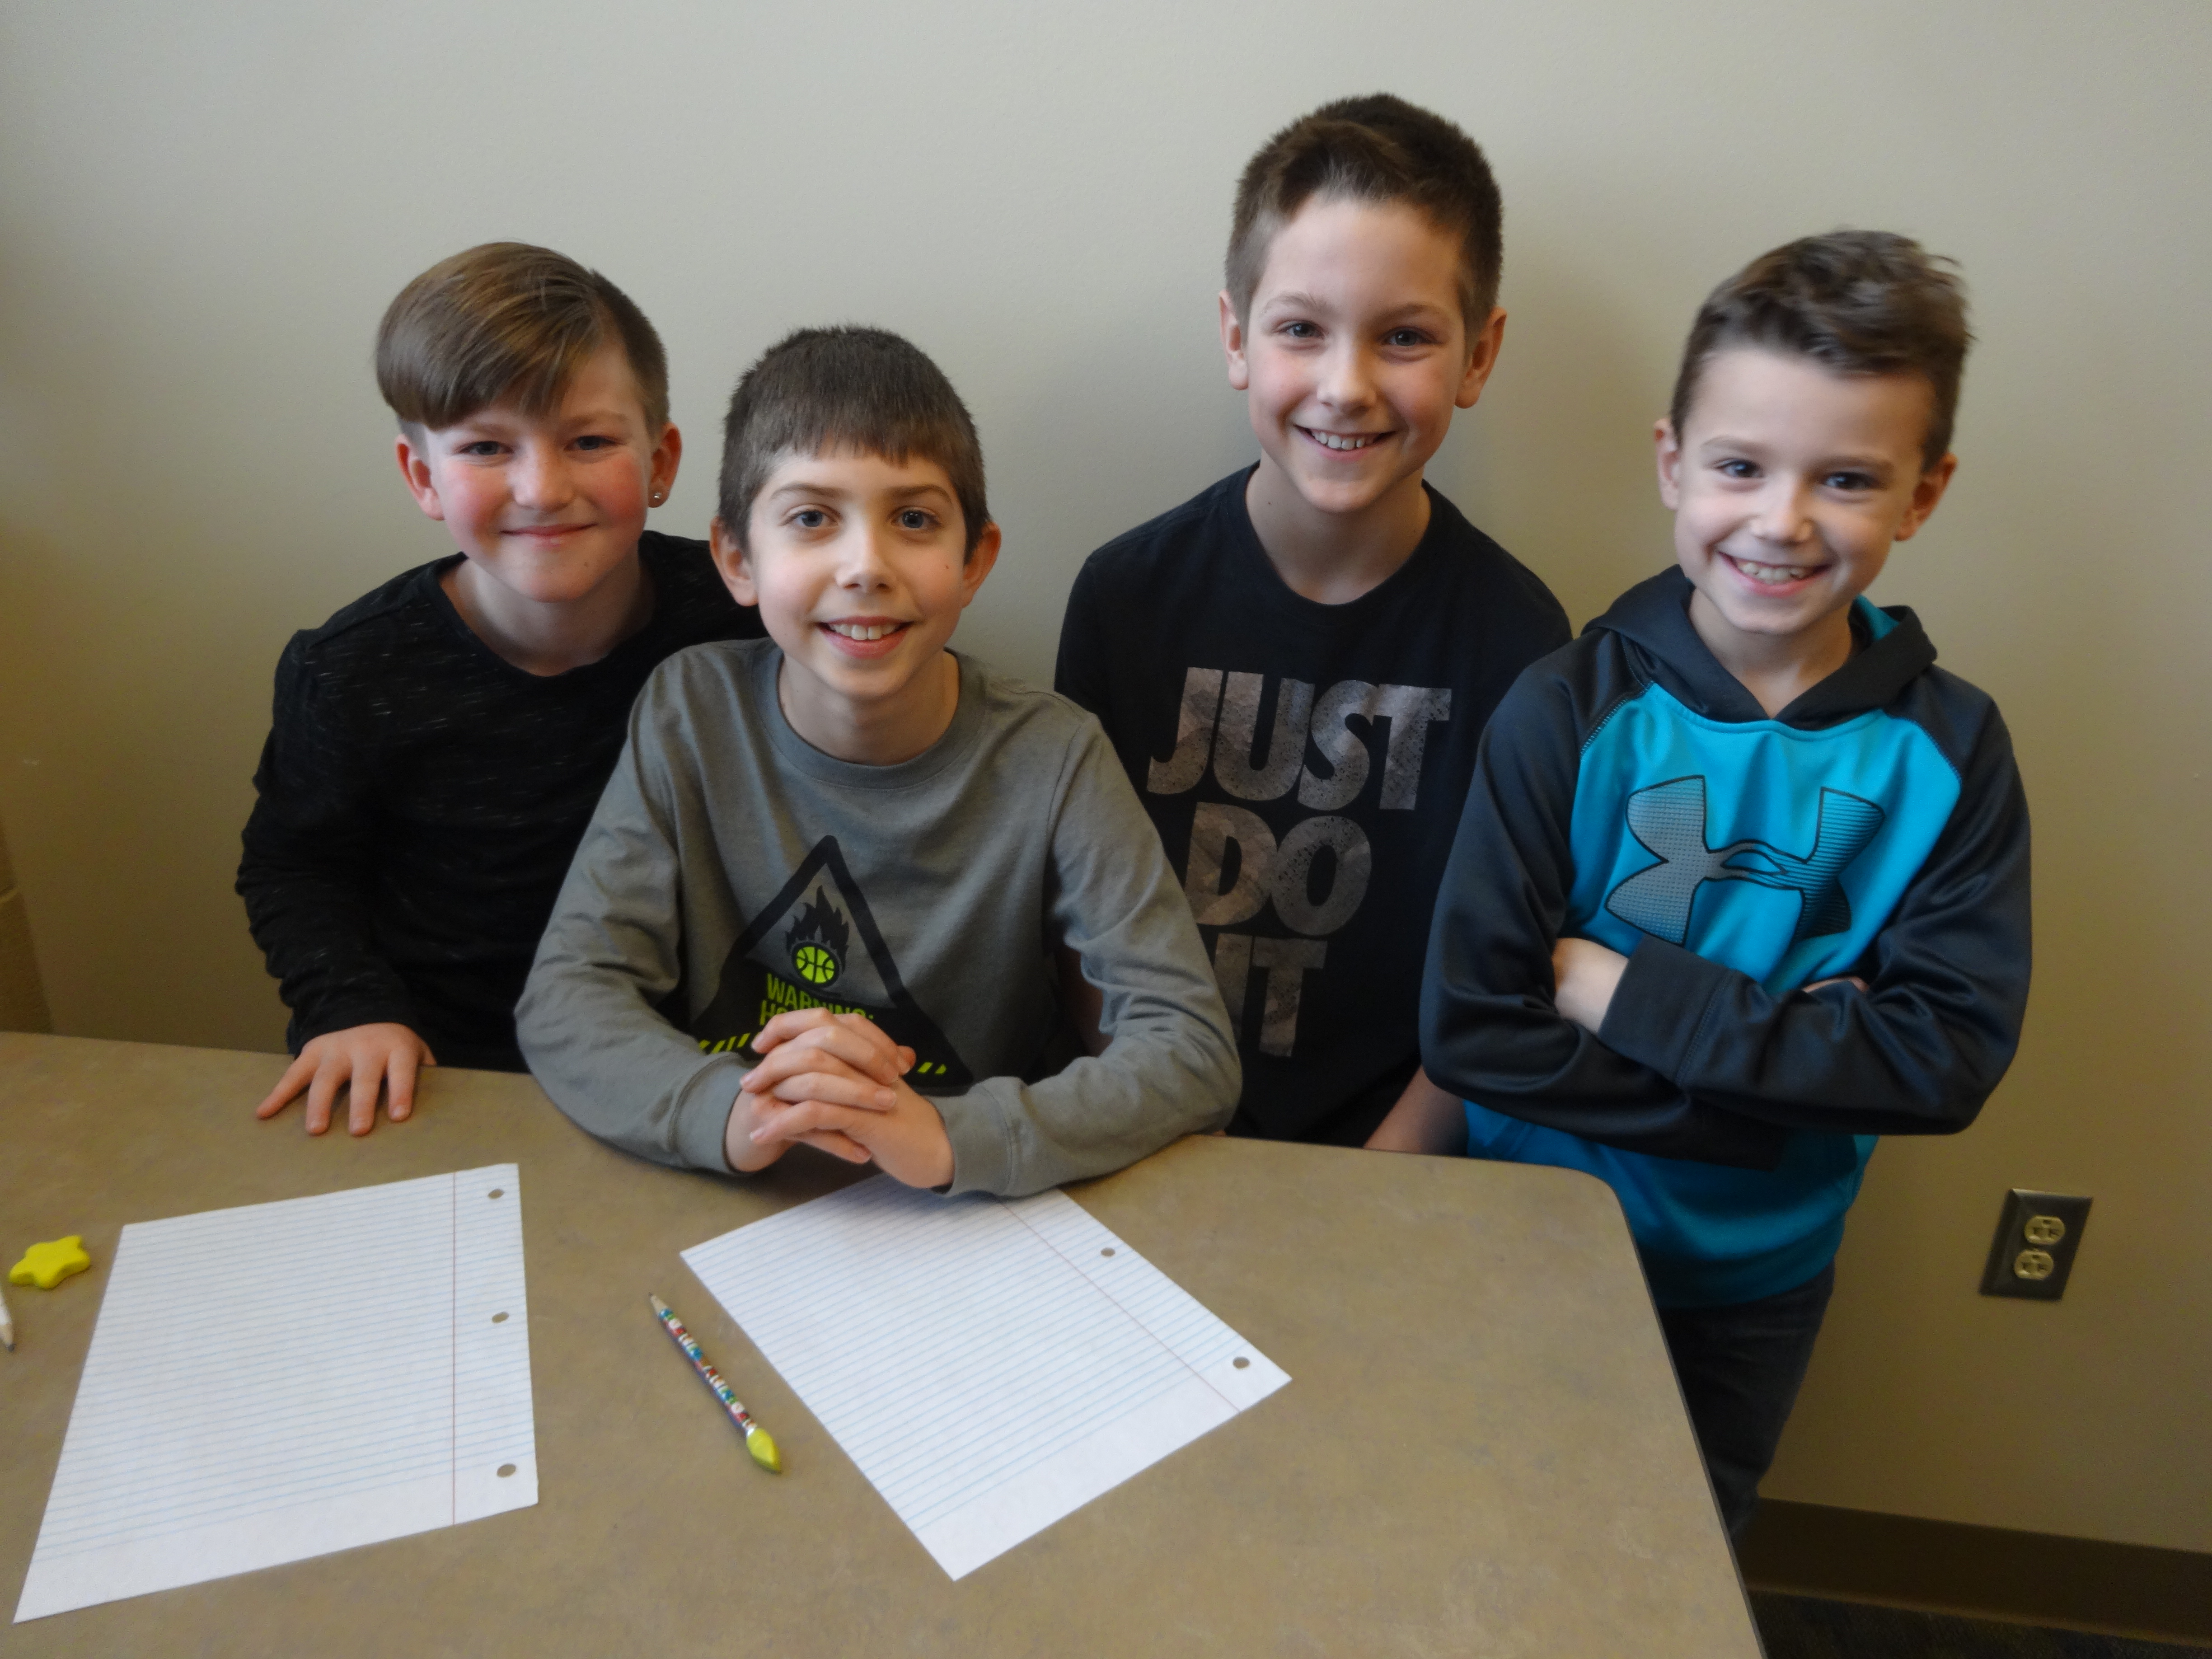 The staff members of What's Happening! Brookfield Elementary are, from left, Brayden Reed, Judah DeJoy, John Brenner and Tyler Miller.